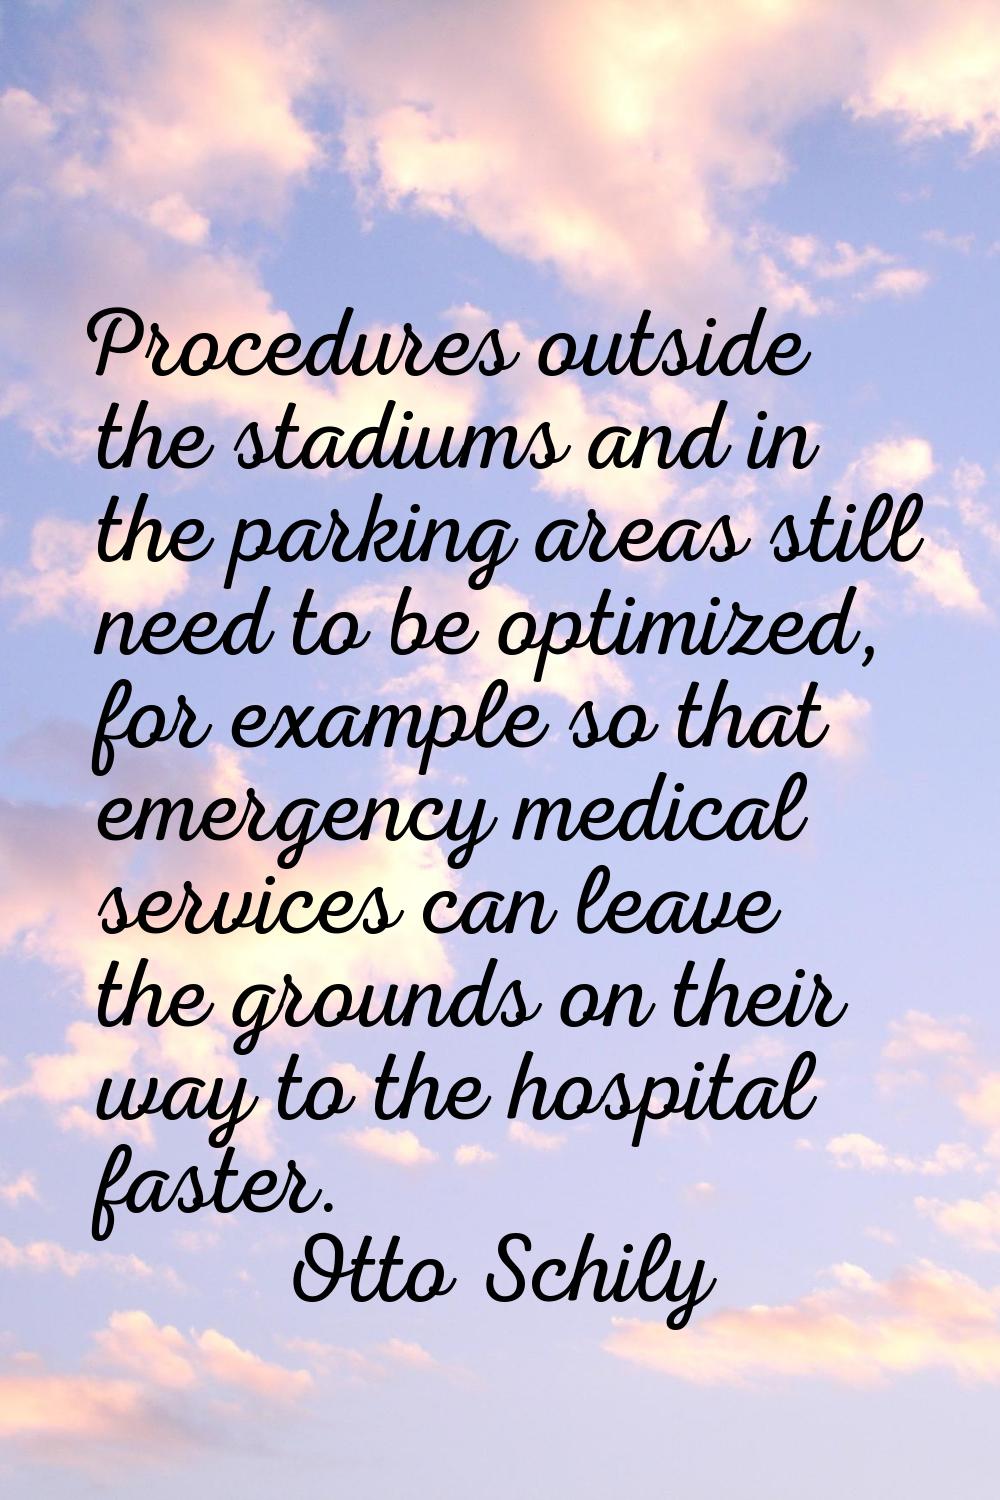 Procedures outside the stadiums and in the parking areas still need to be optimized, for example so